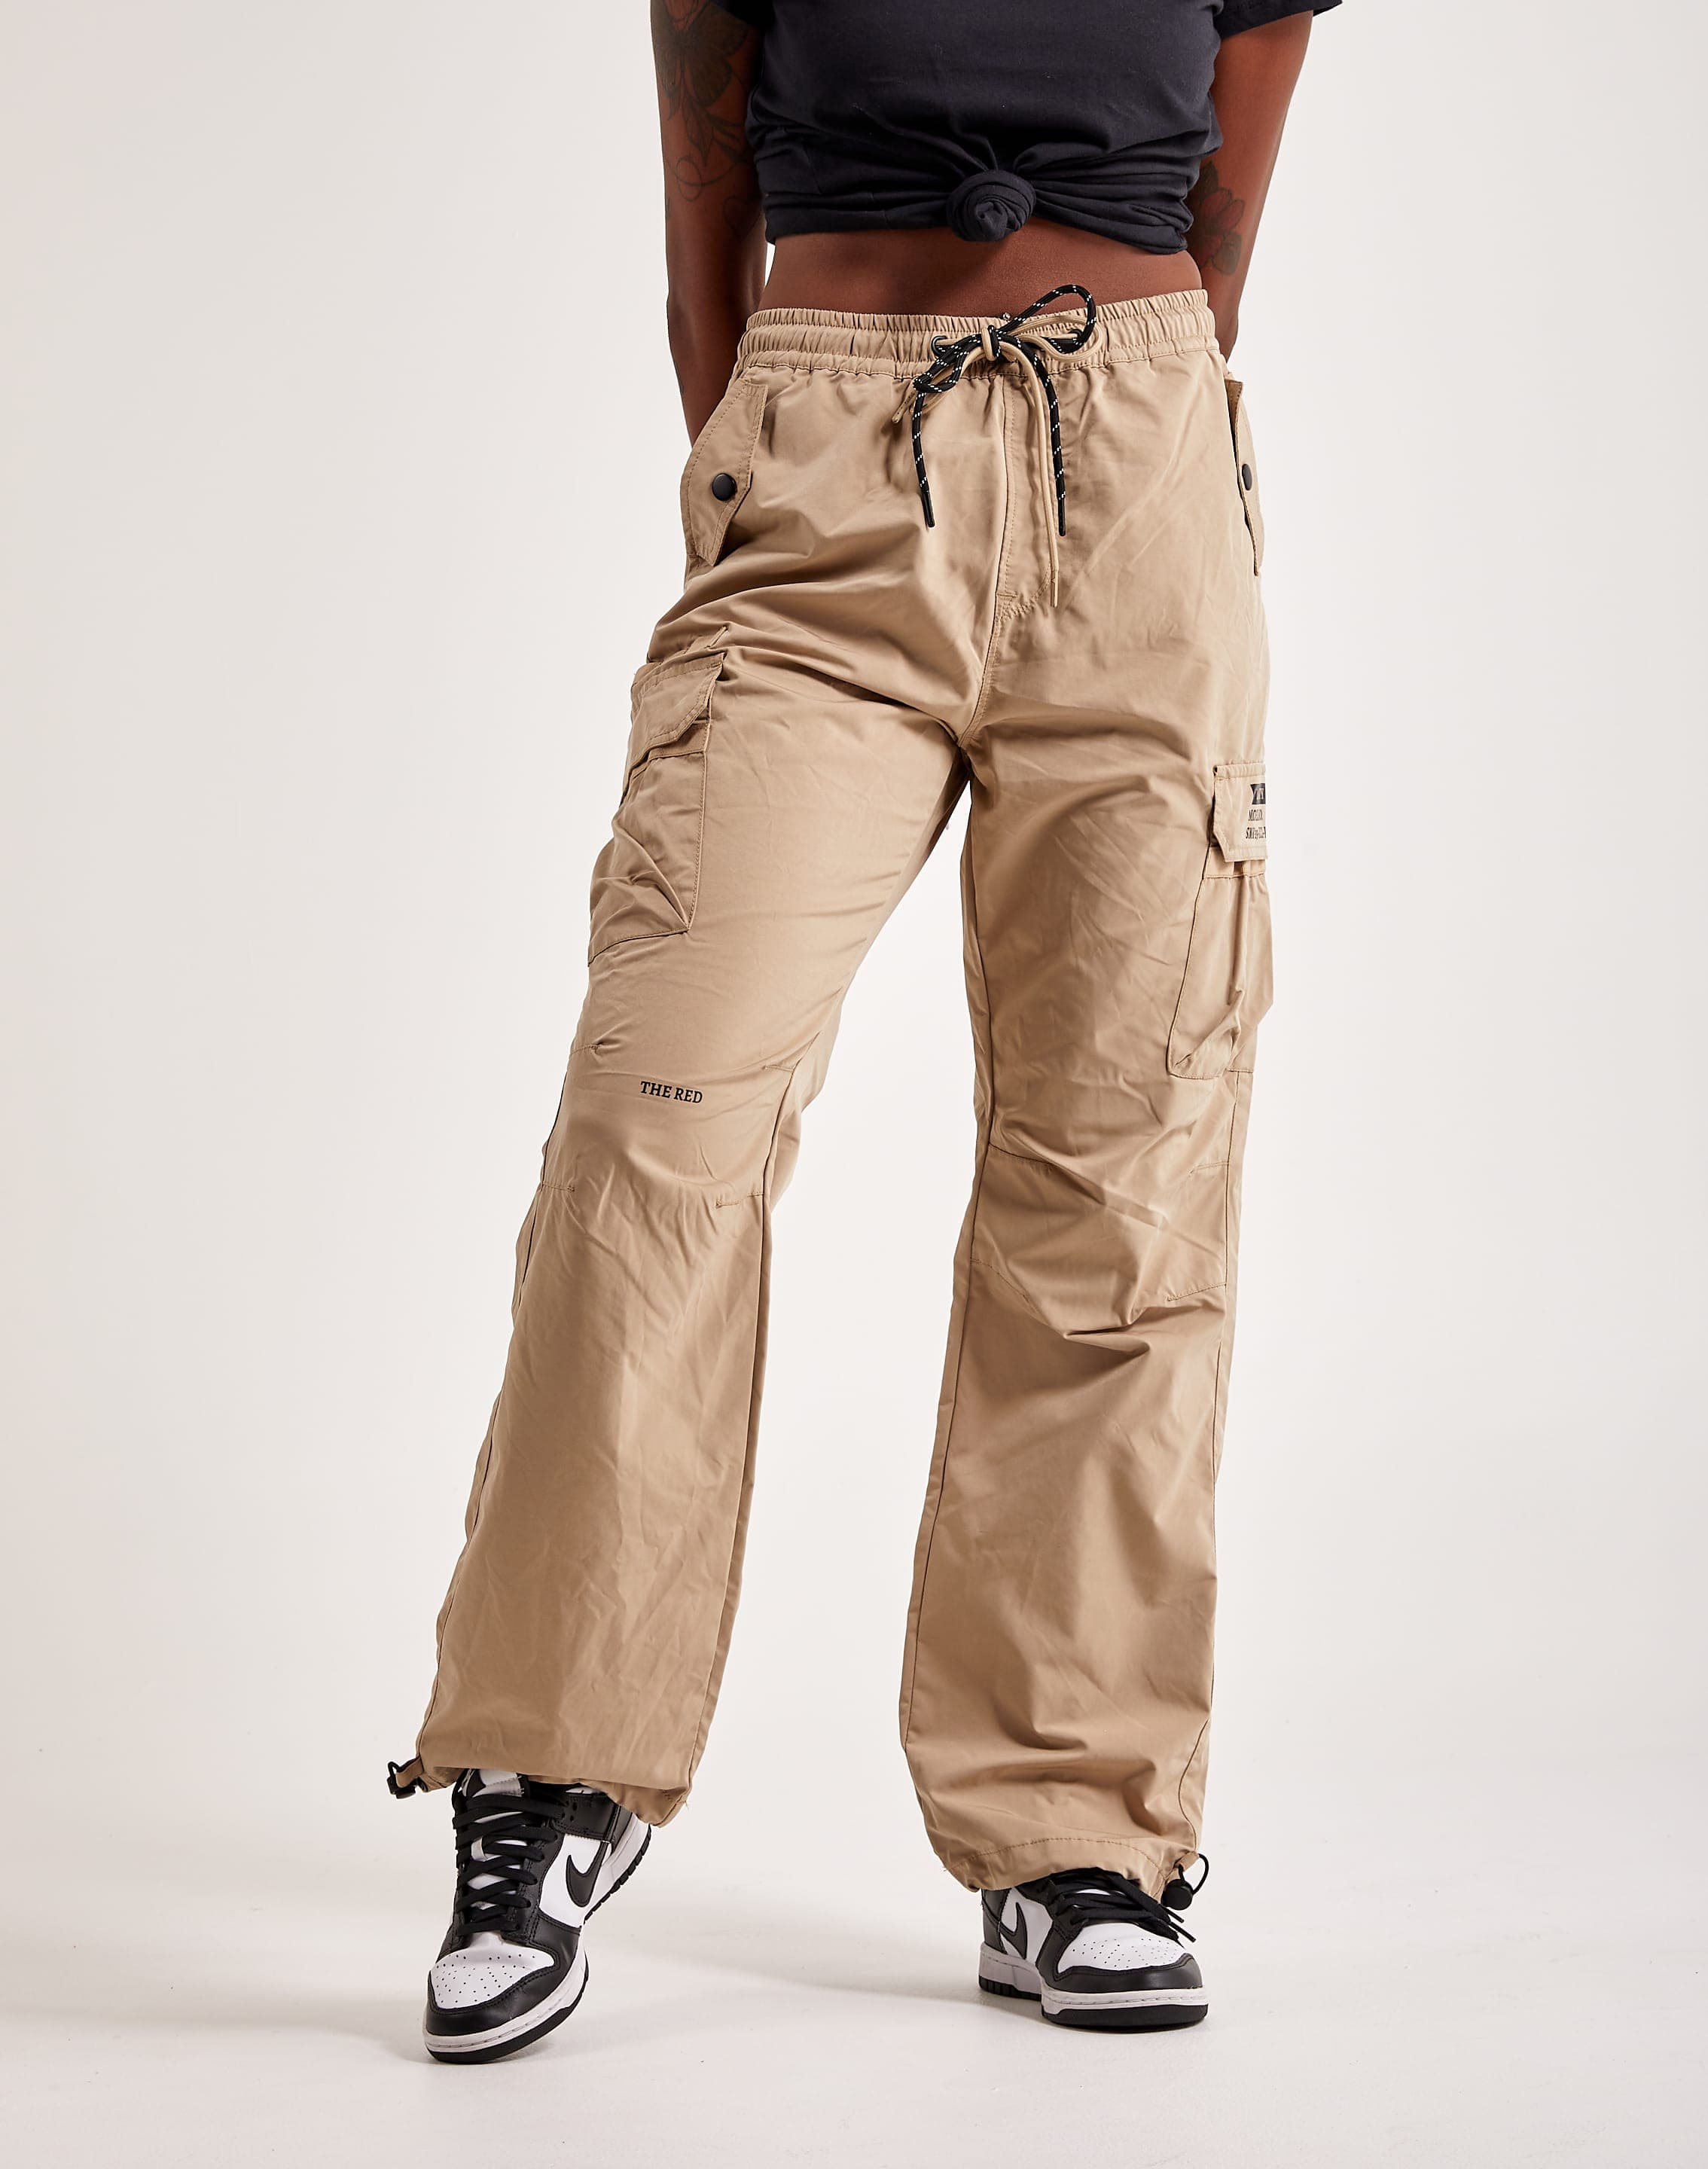  ReachMe Womens Baggy High Waisted Cargo Pants with